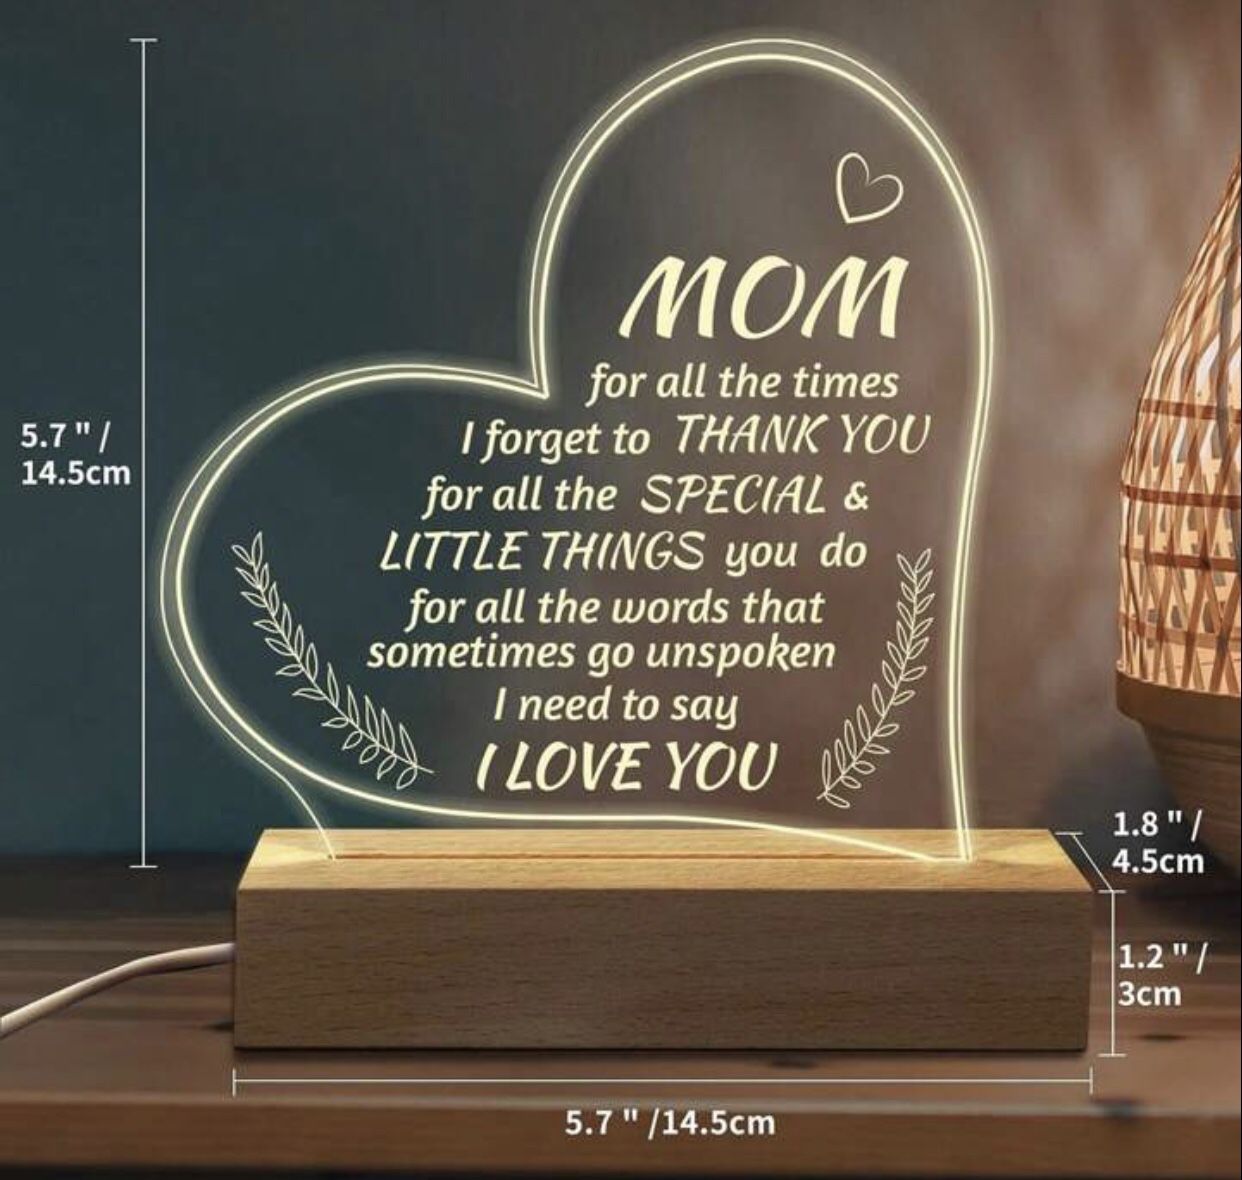 Table Lamp For Mom (Great Mother’s Day Gift)